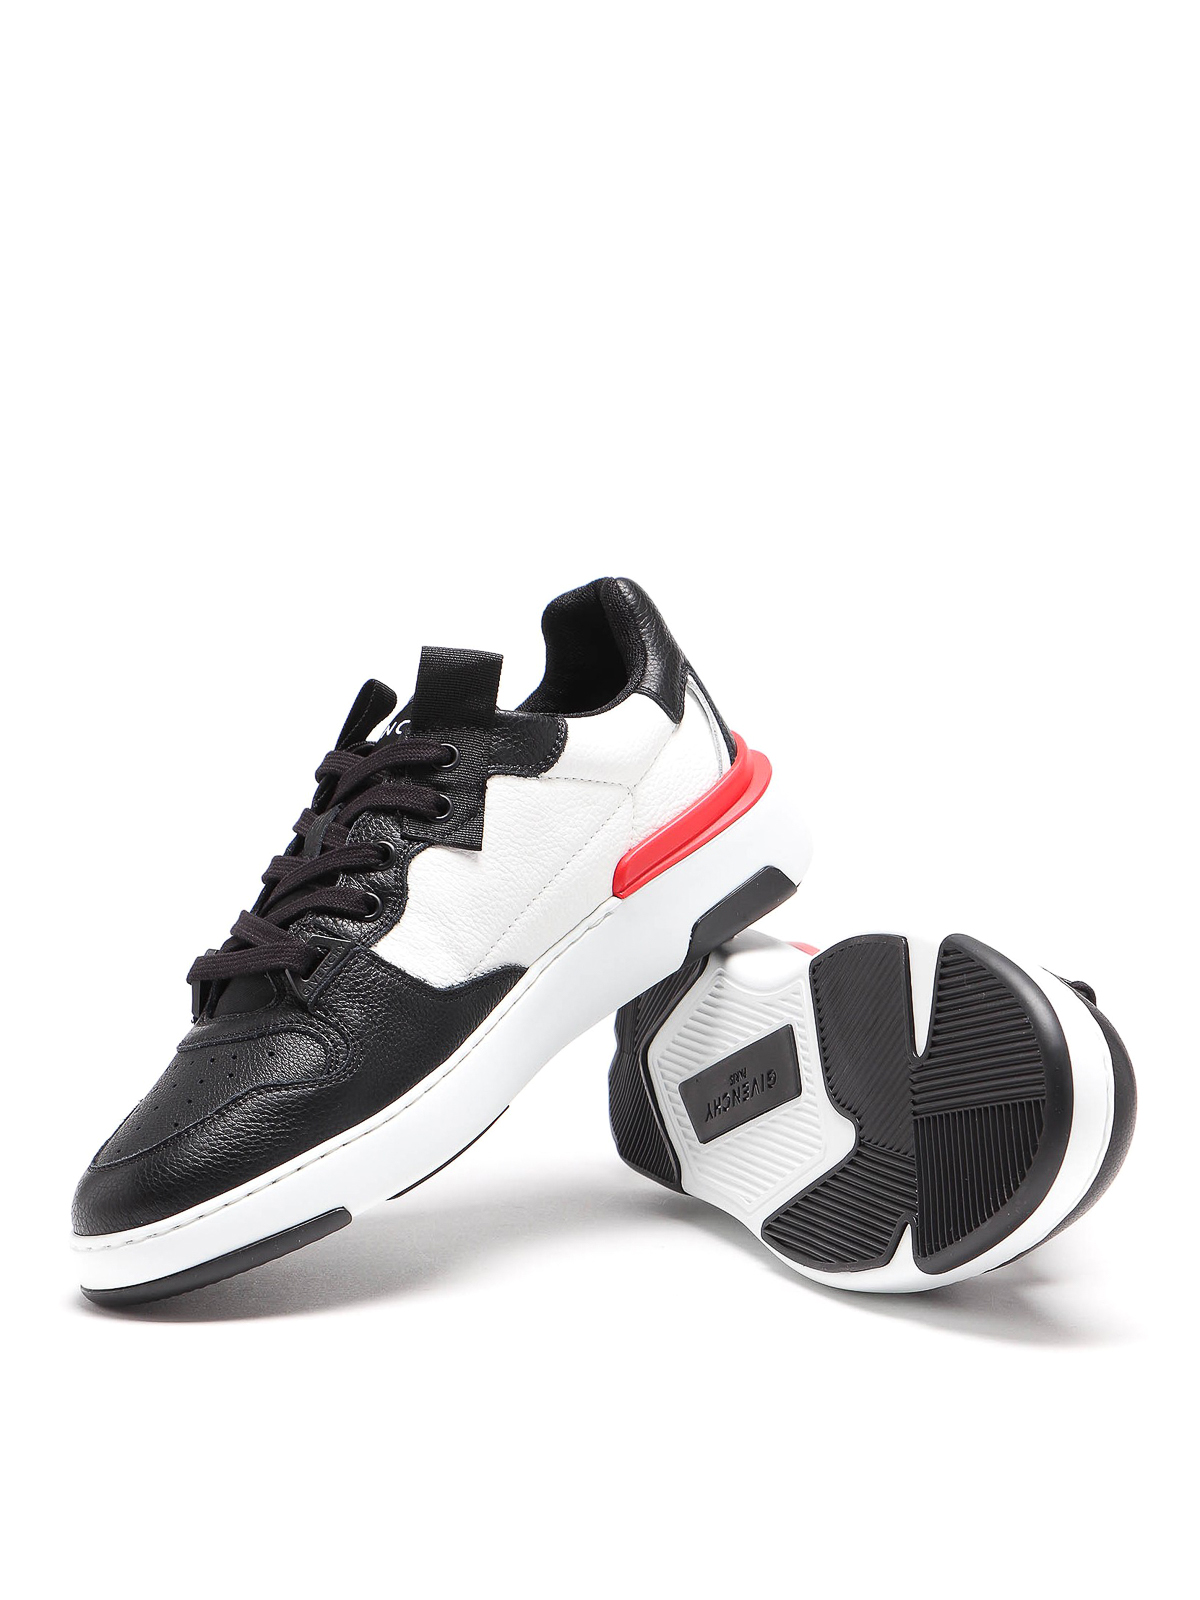 boekje test Definitief Trainers Givenchy - Wing leather low top sneakers - BH002KH0K6004